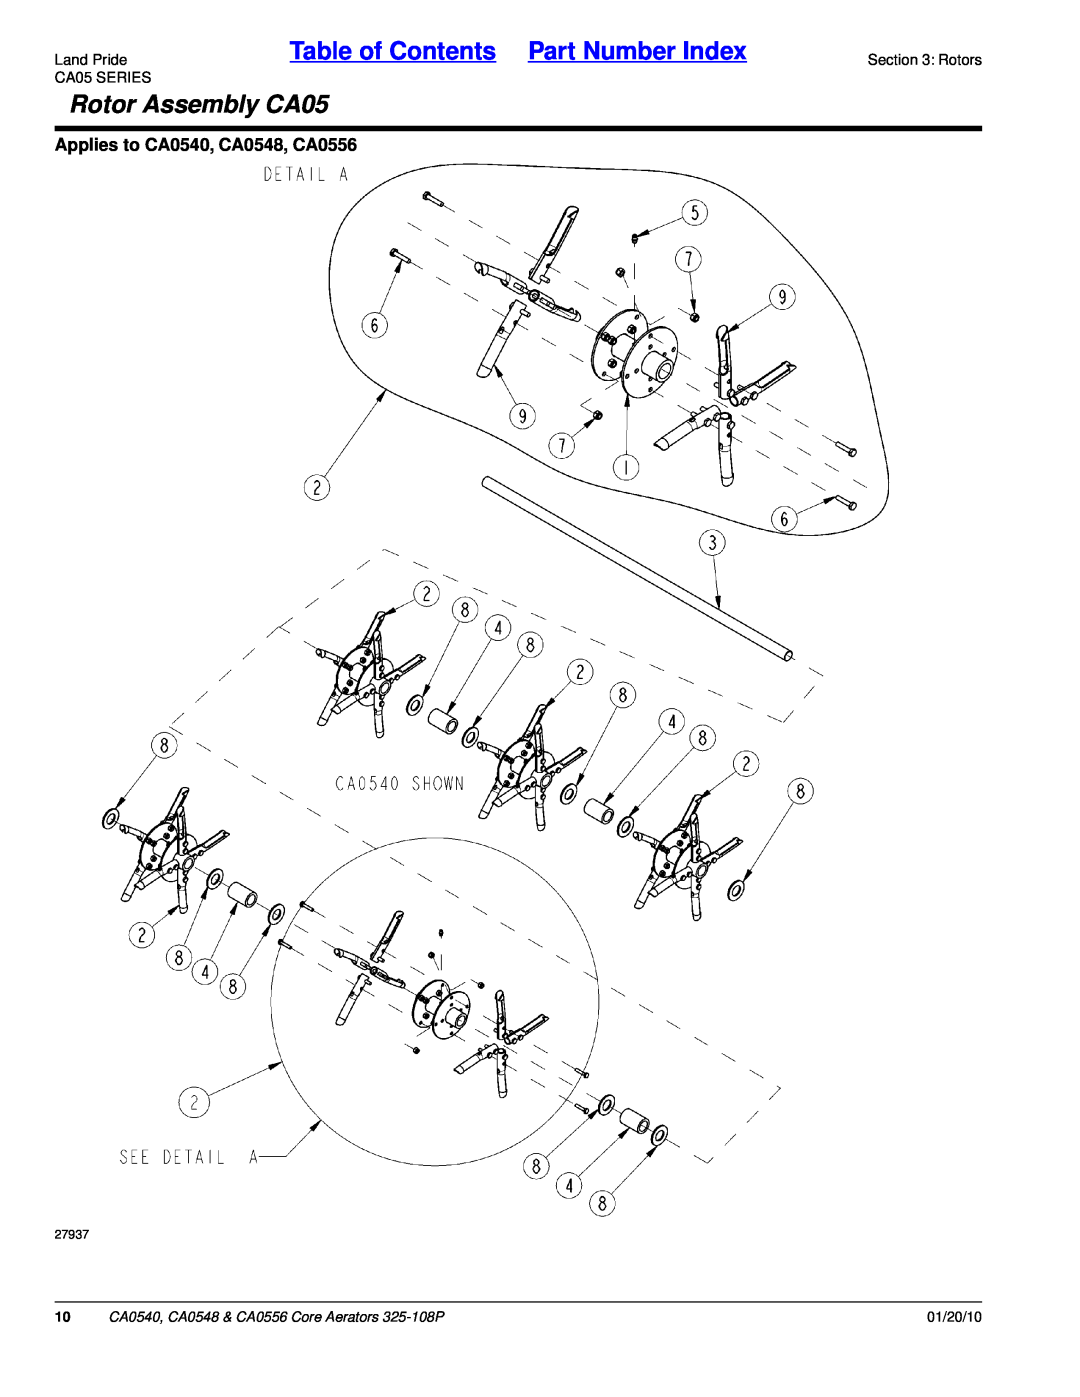 Land Pride manual Rotor Assembly CA05, Applies to CA0540, CA0548, CA0556, Land PrideTable of Contents Part Number Index 